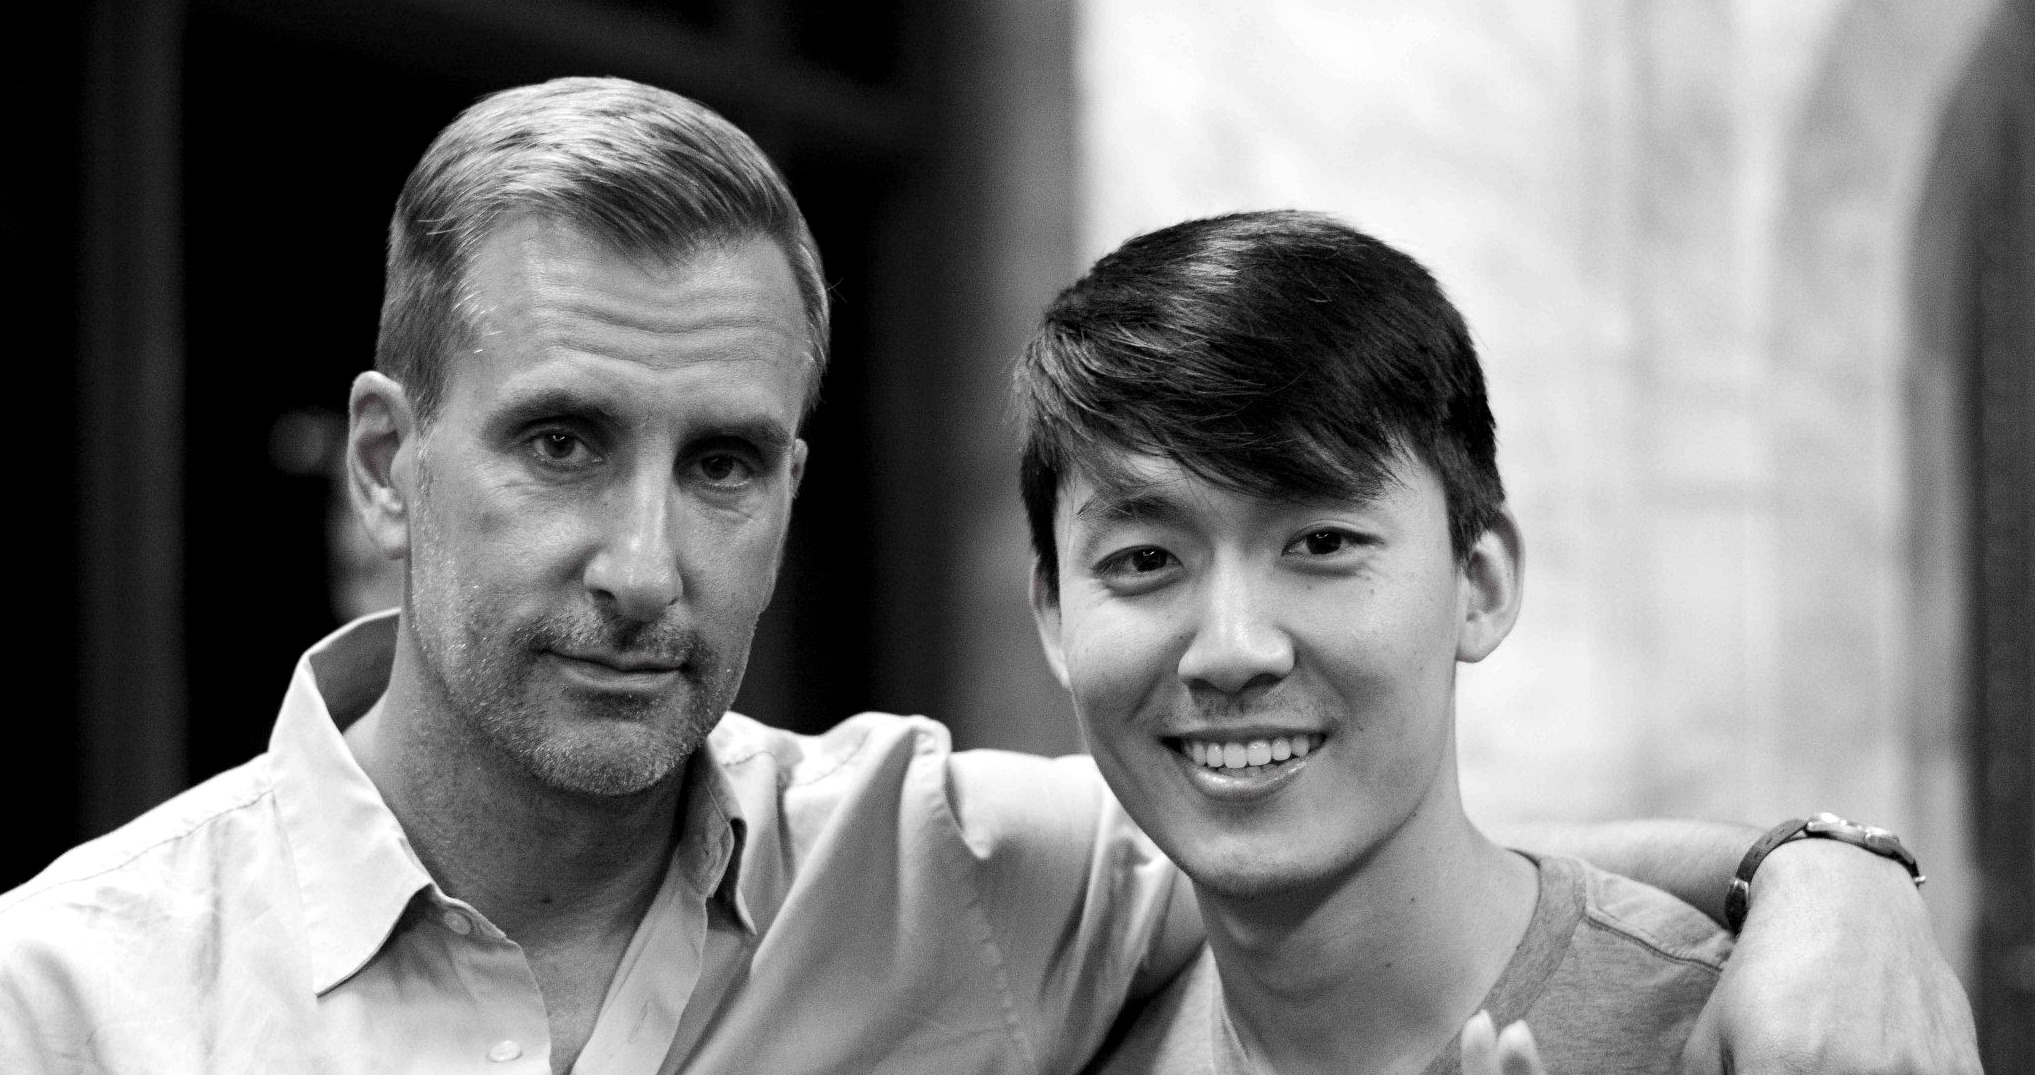 Actor Brian Unger & Dior C. Choi on set. Behind the scenes on set of 